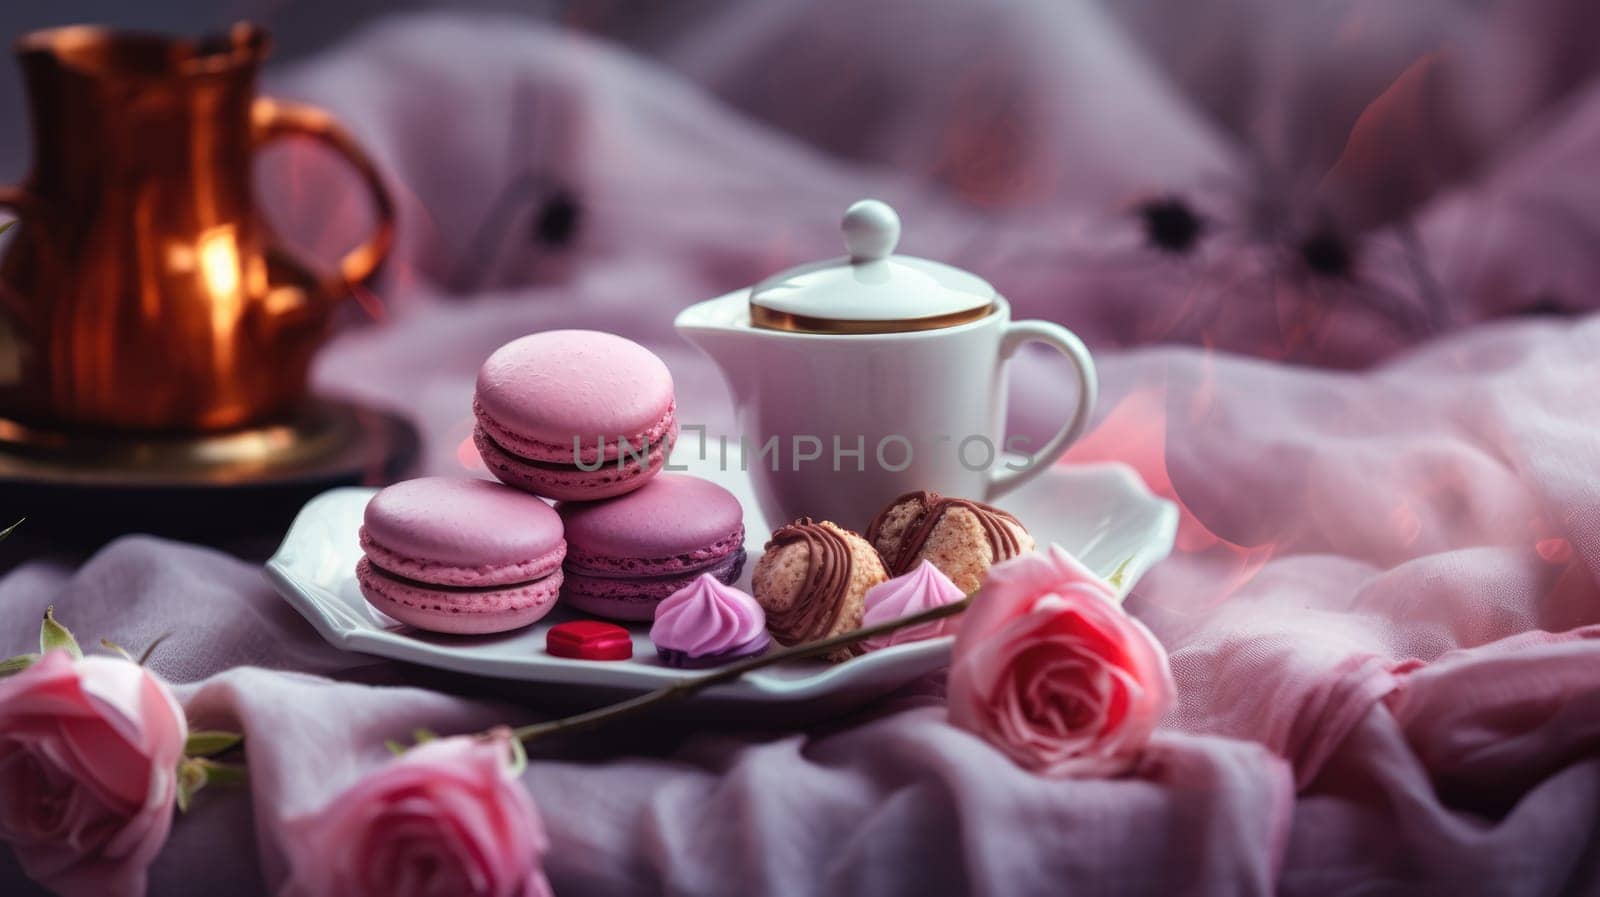 Breakfast in bed for Valentine's Day, tea and pink macaron, blurred background by natali_brill